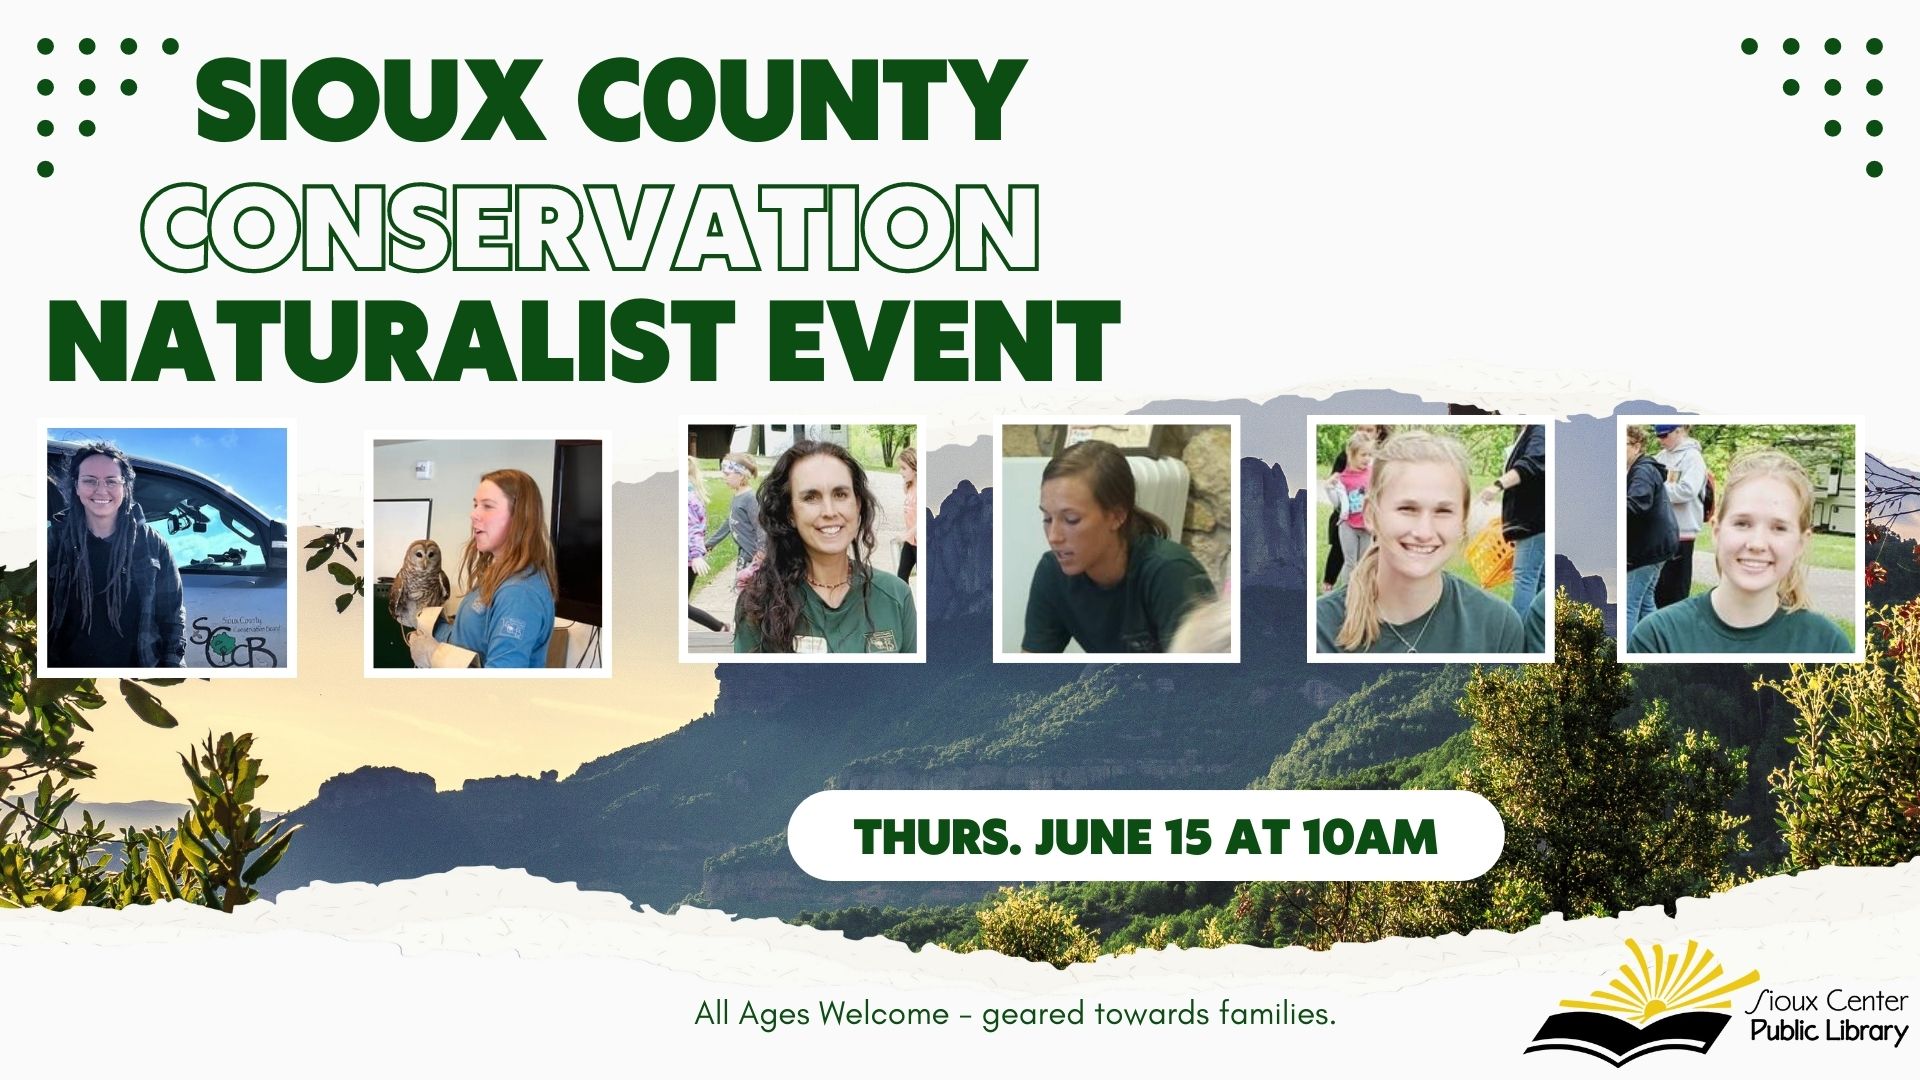 Sioux County Naturalist